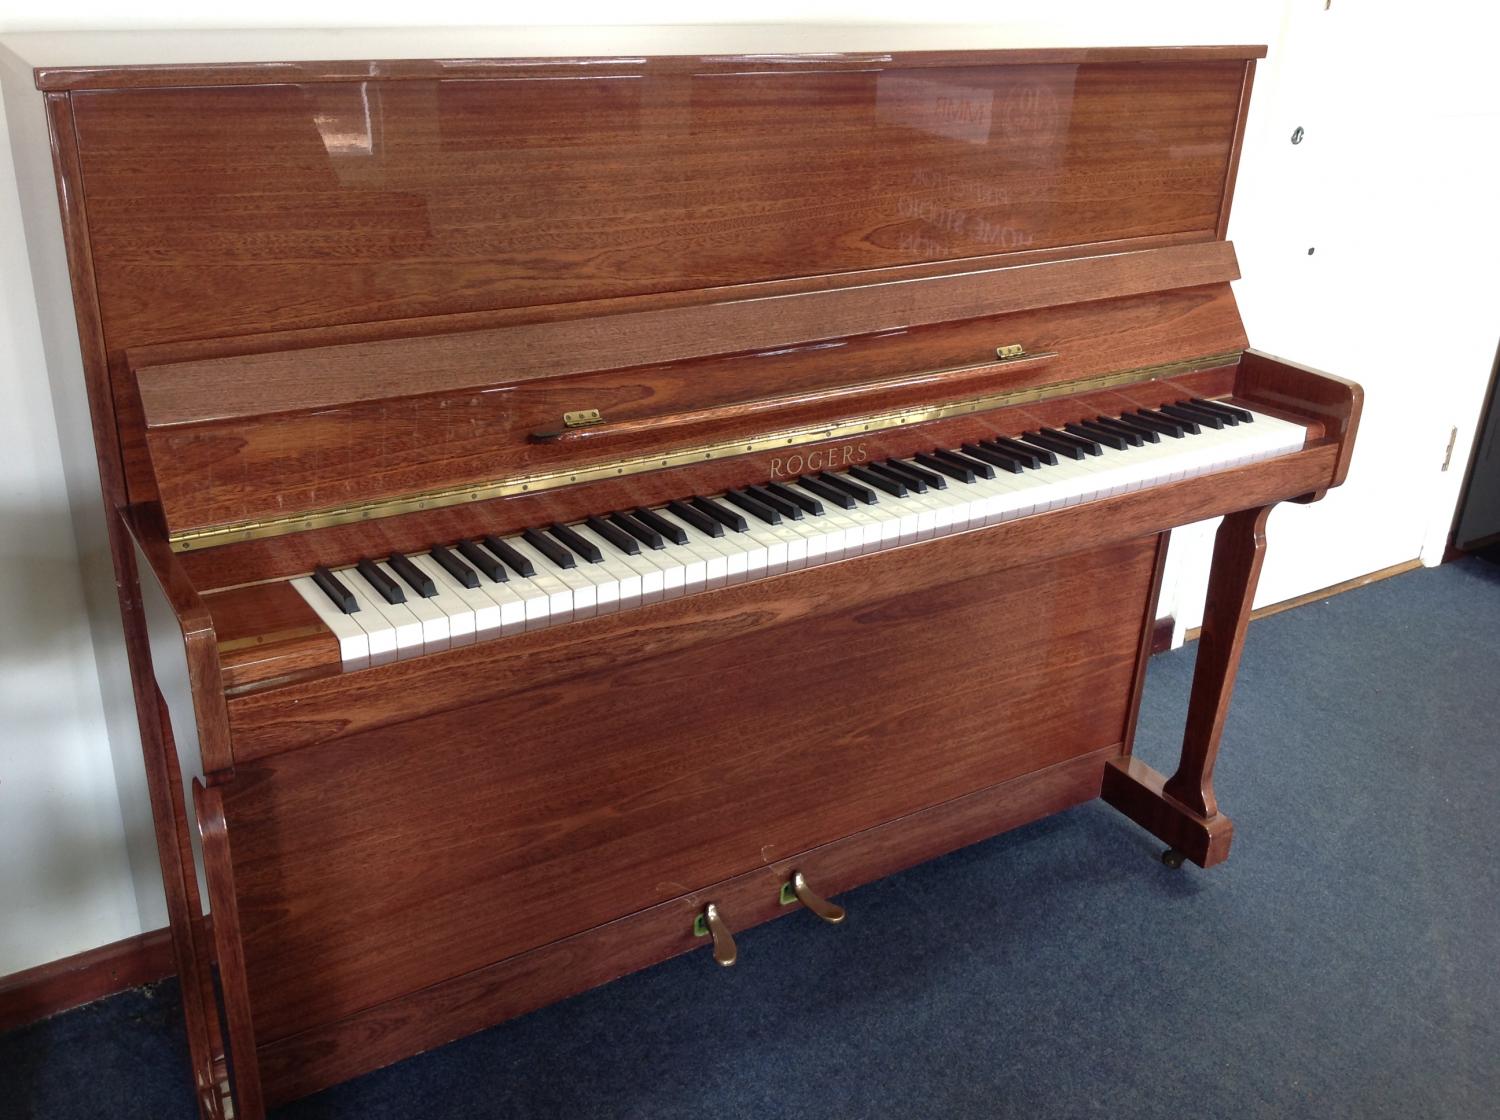 Rogers Modern Upright piano for sale